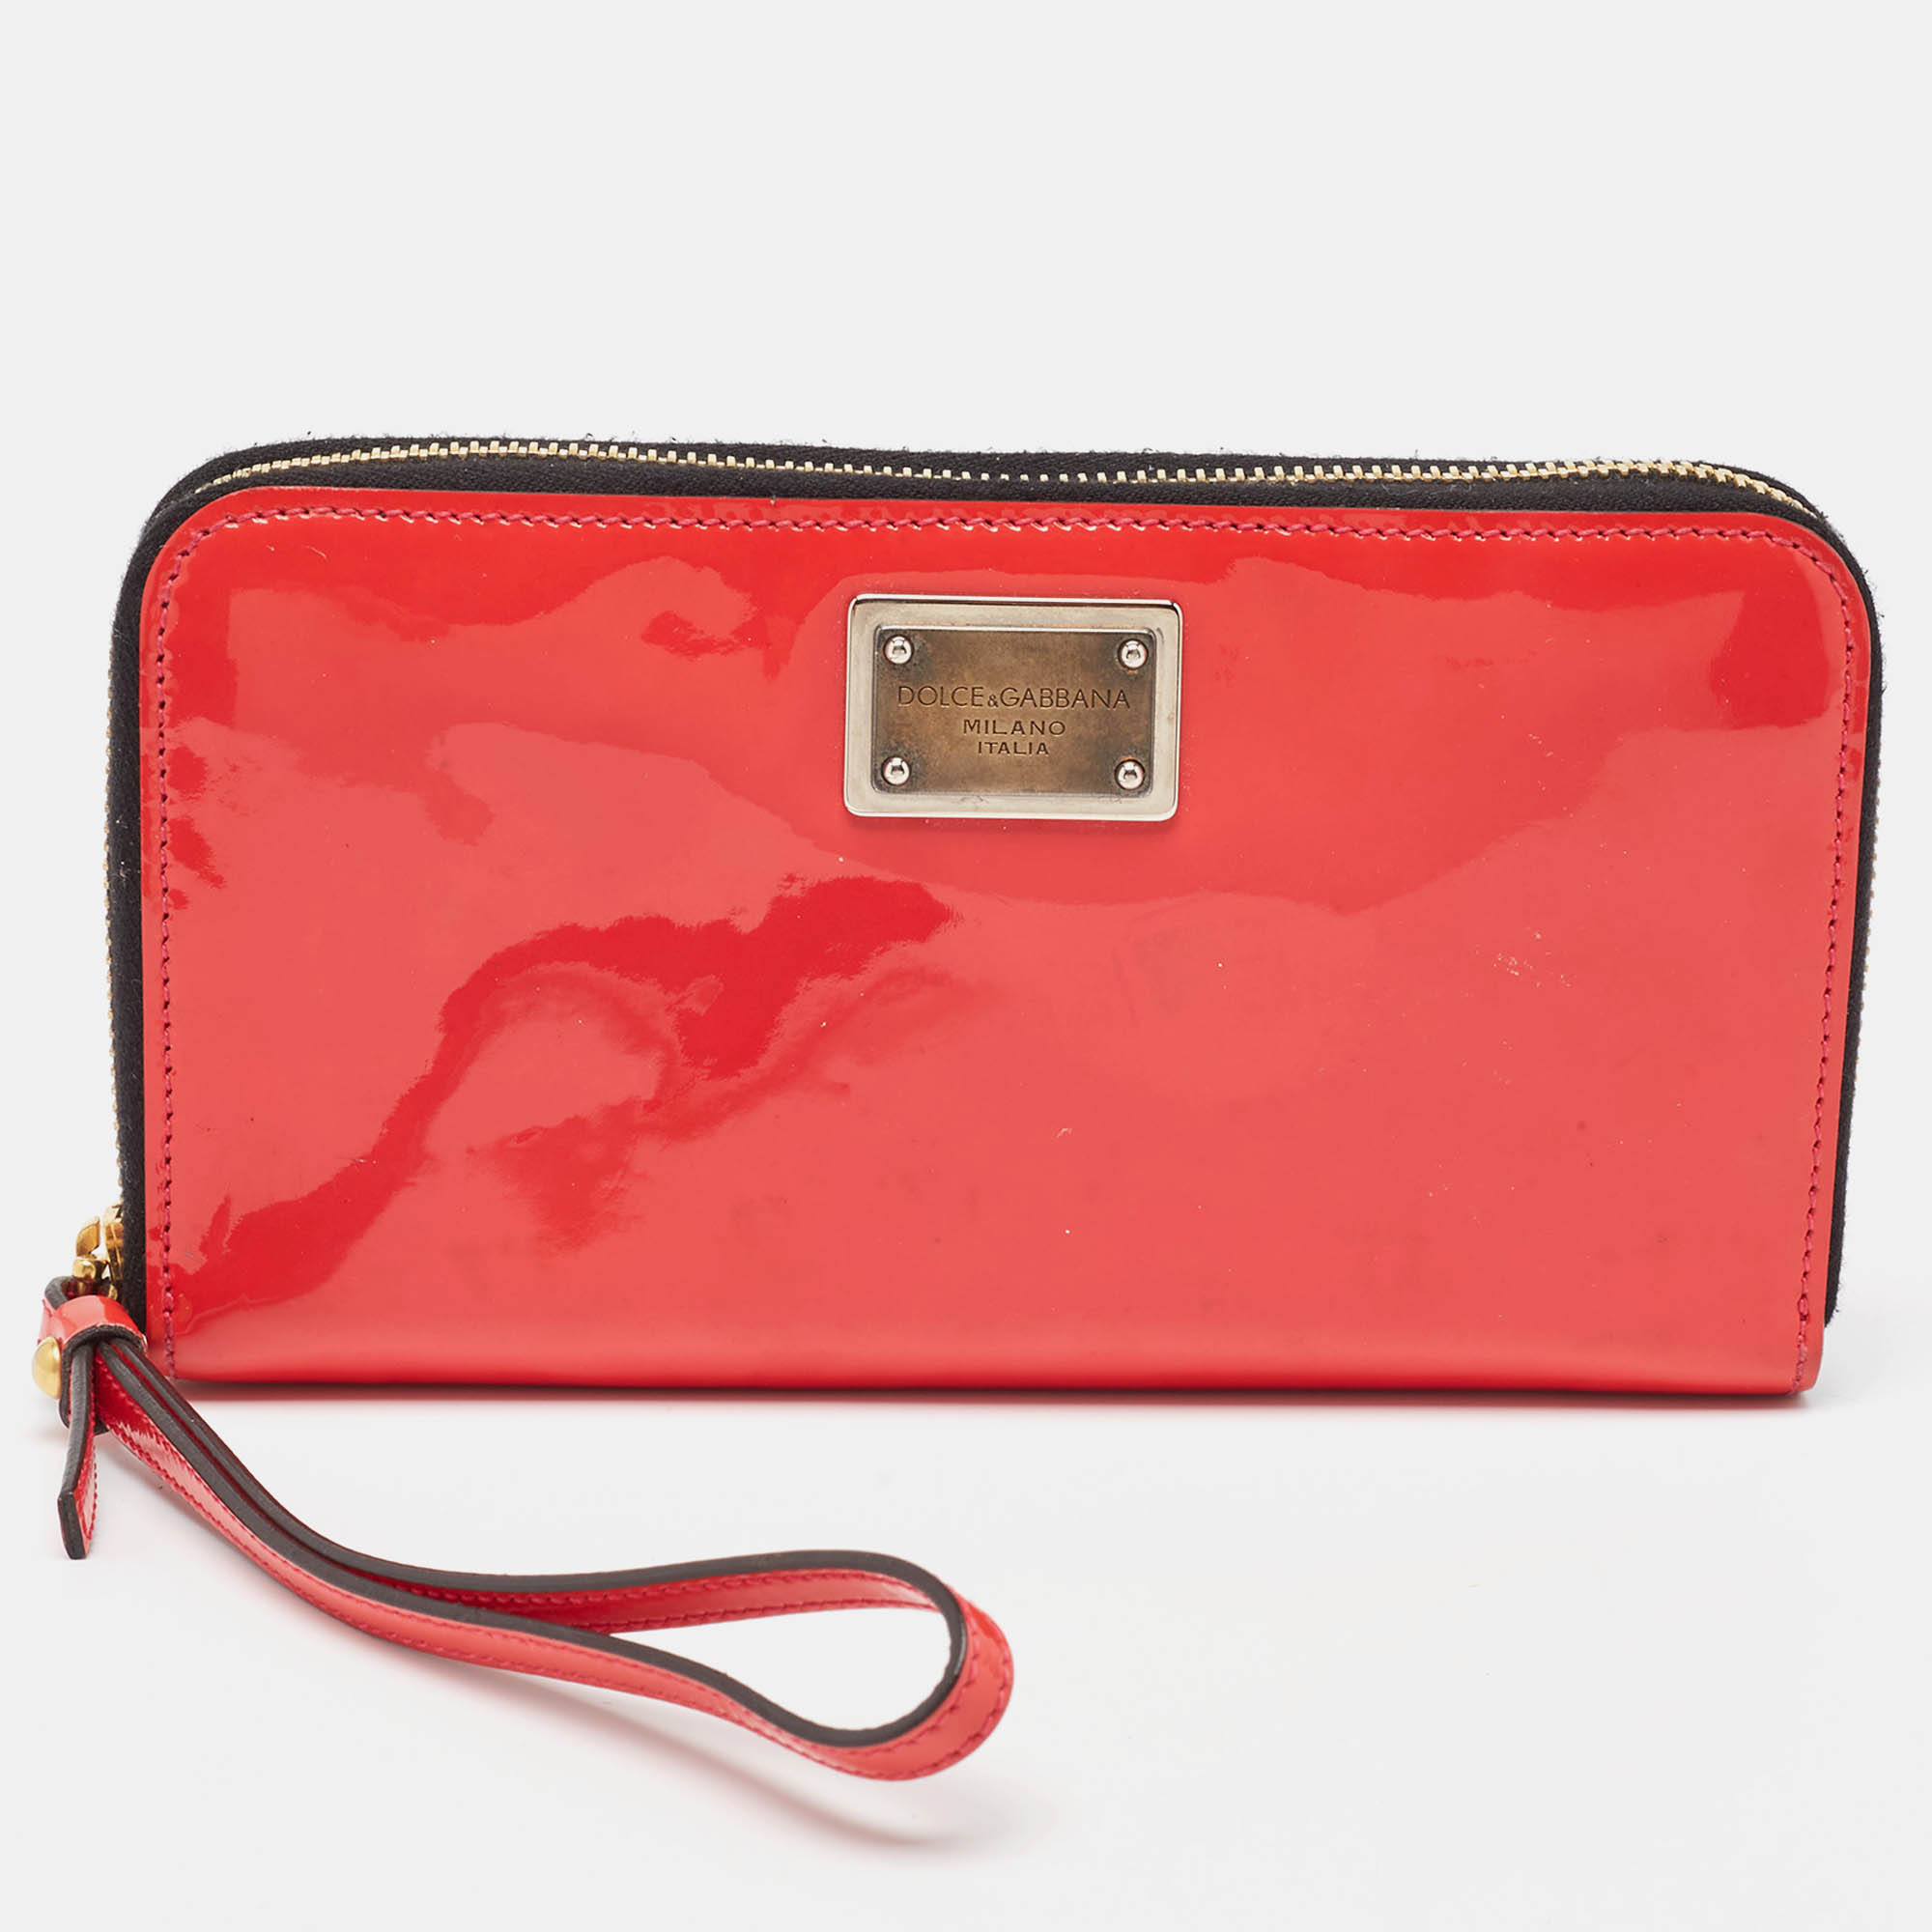 Pre-owned Dolce & Gabbana Red Patent Leather Zip Around Wristlet Wallet